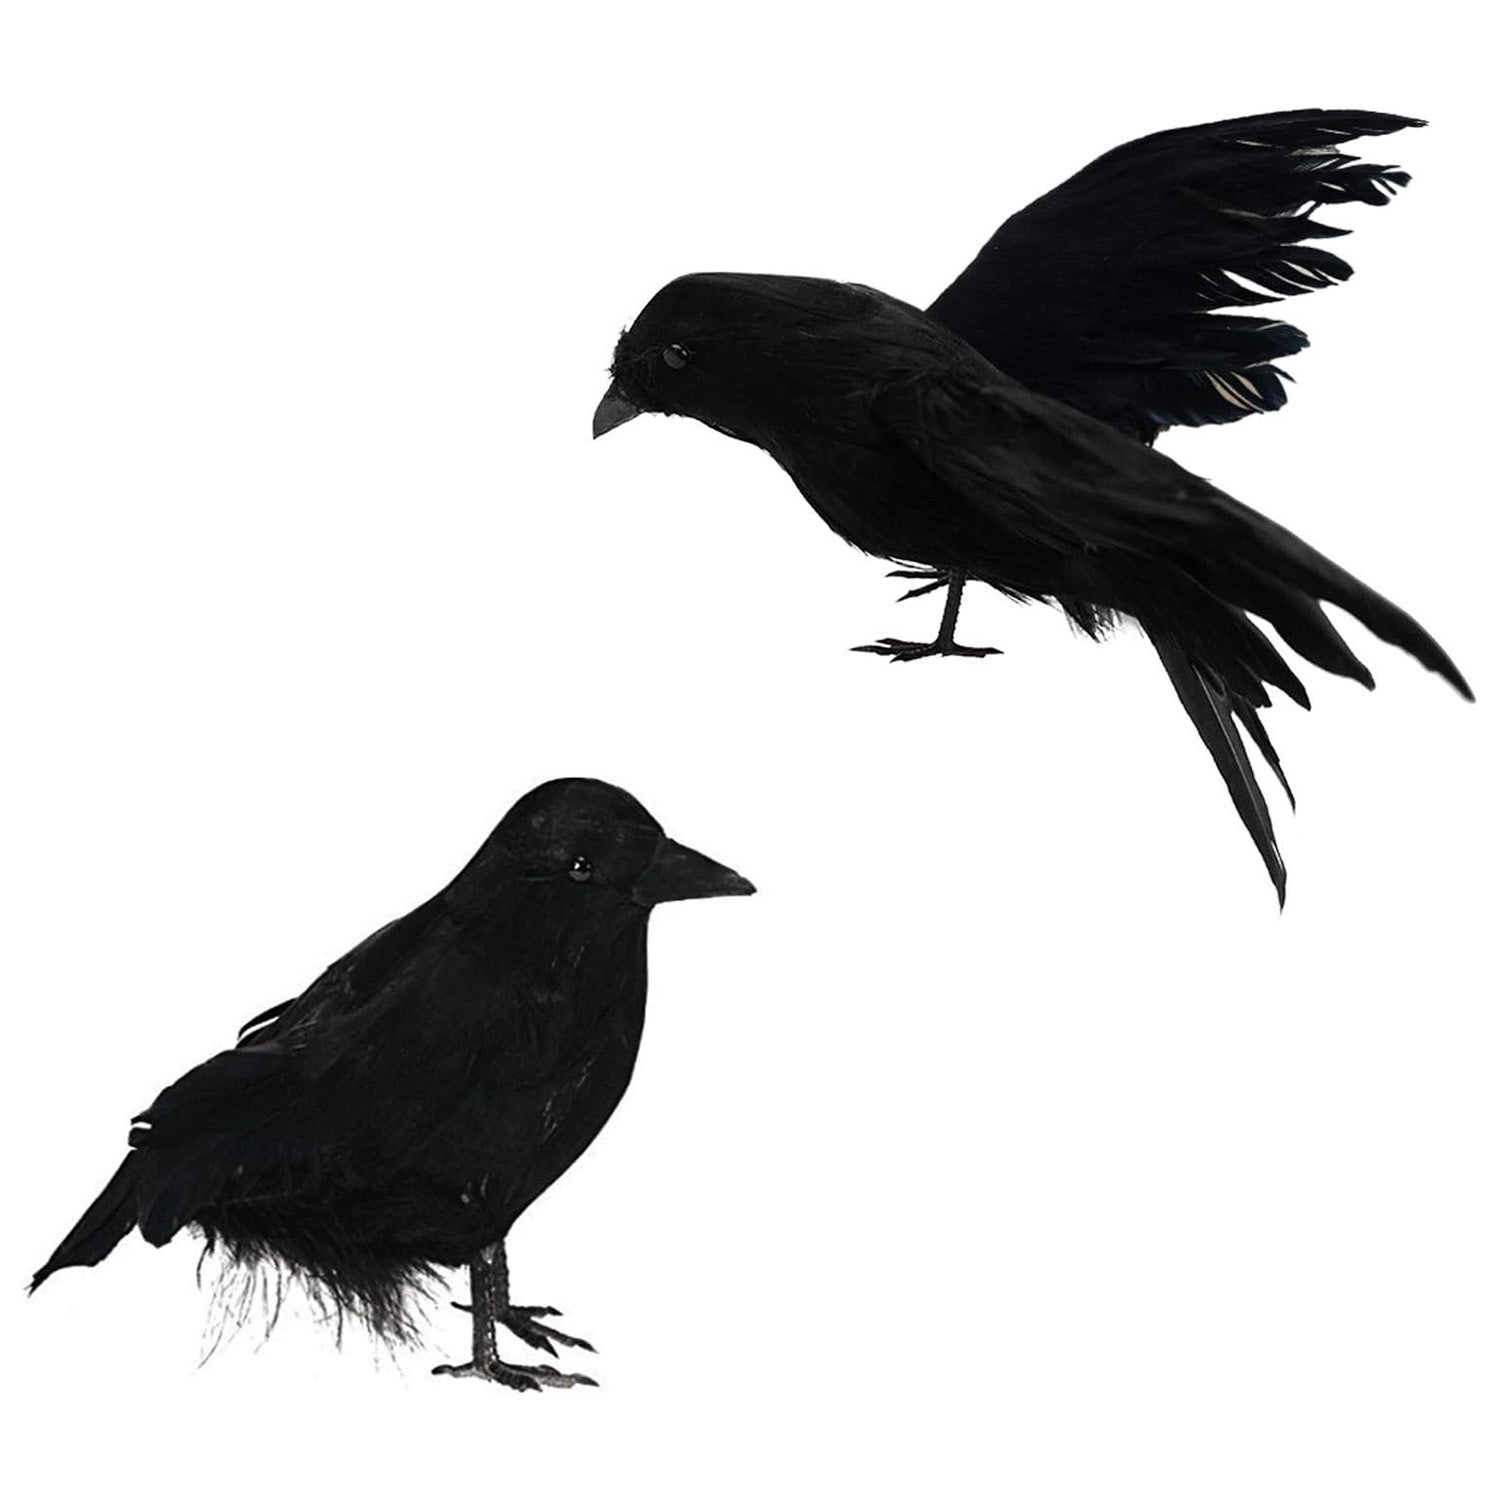 2 Pcs Halloween Realistic Crows Black Feathered Flying Standing Crows Artificial Fake Birds Ravens